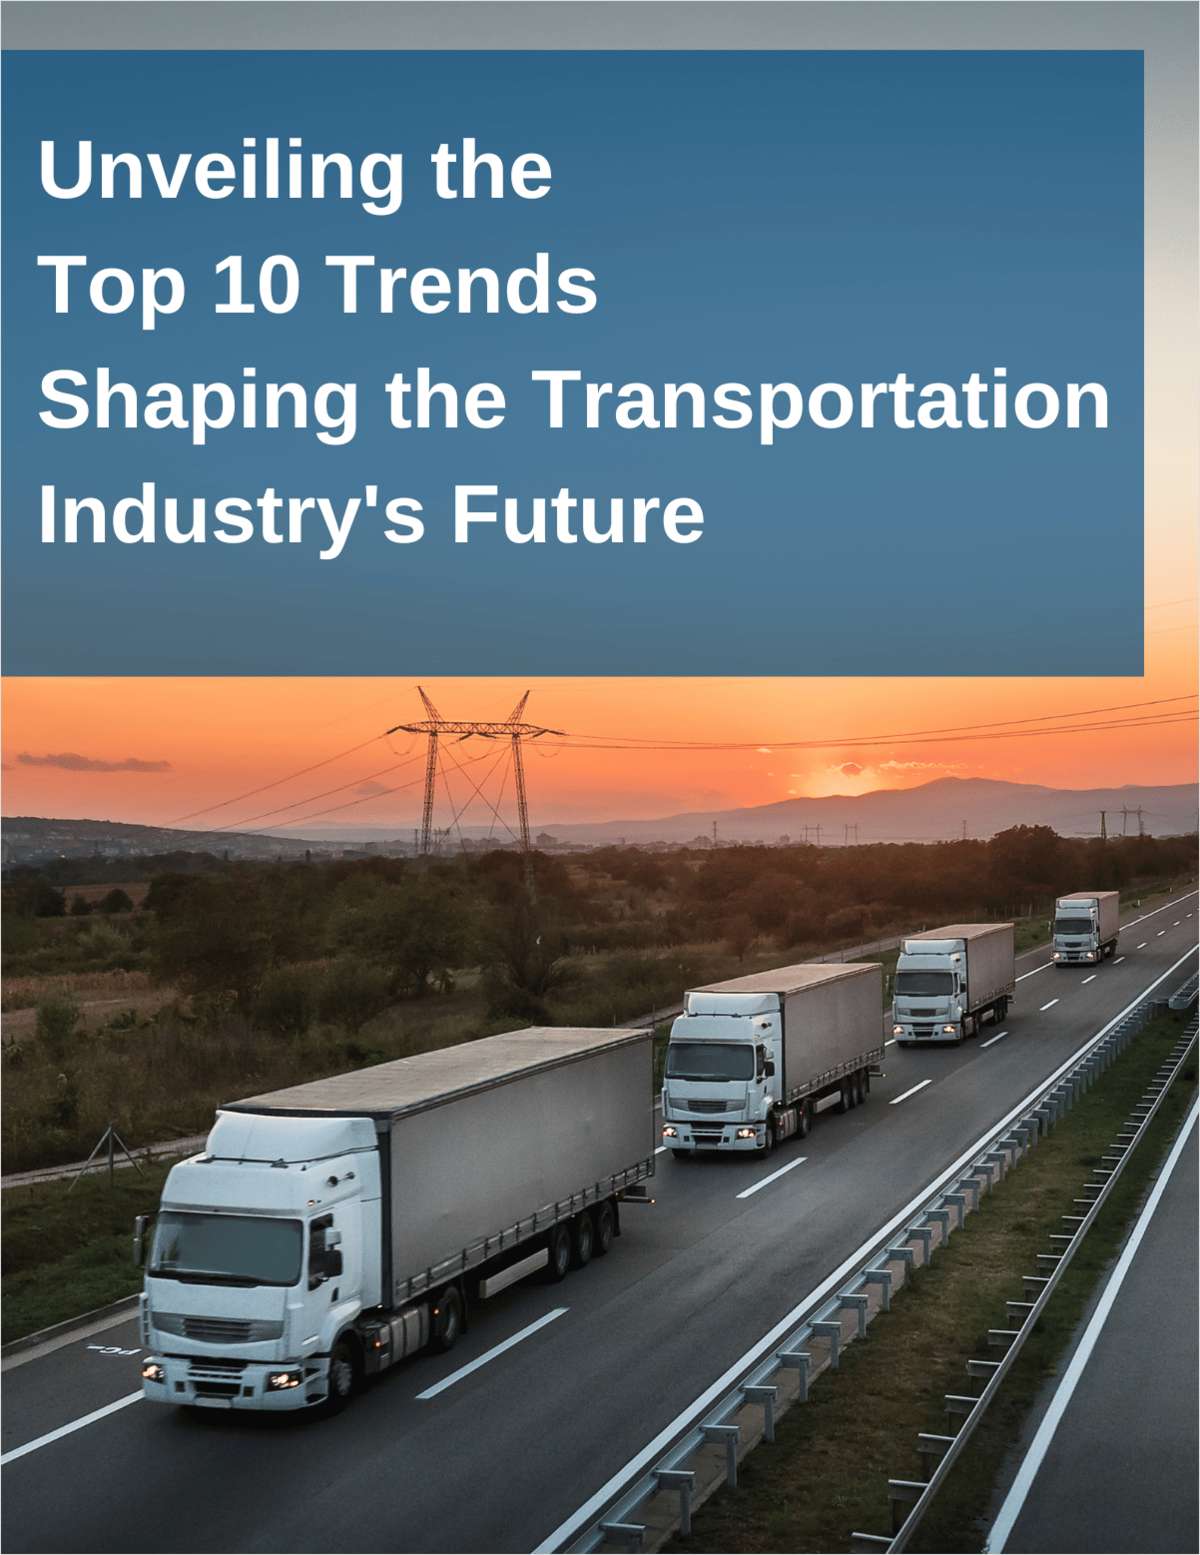 Blog Post: Unveiling the Top 10 Trends Shaping the Transportation Industry's Future